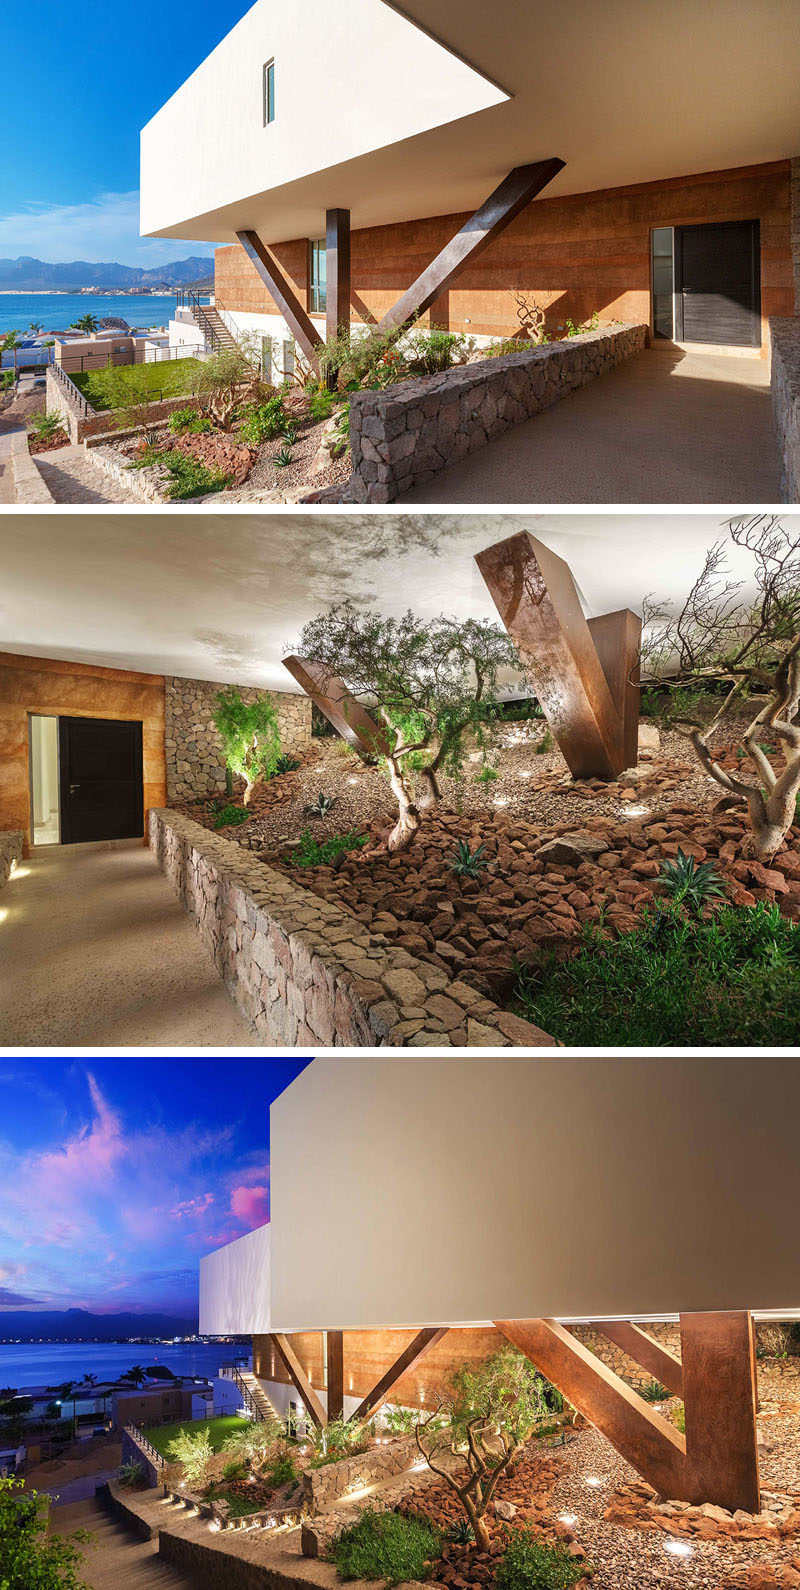 There are several different access points along a stone pathway to reach the backyard of this home.